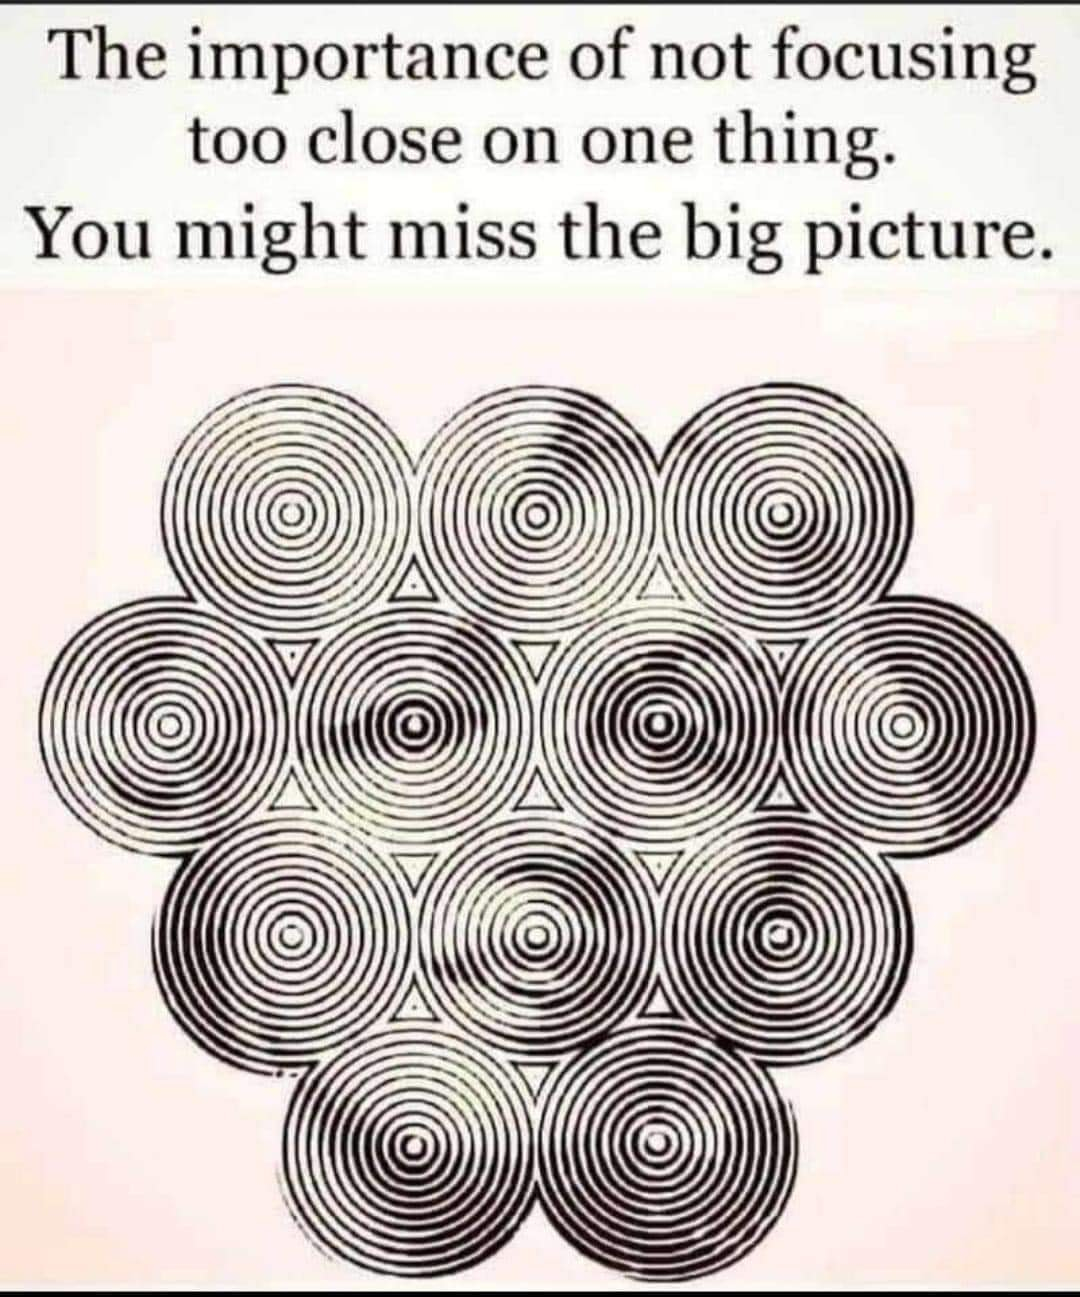 The importance of not focusing too close on one thing. You might miss the big picture.